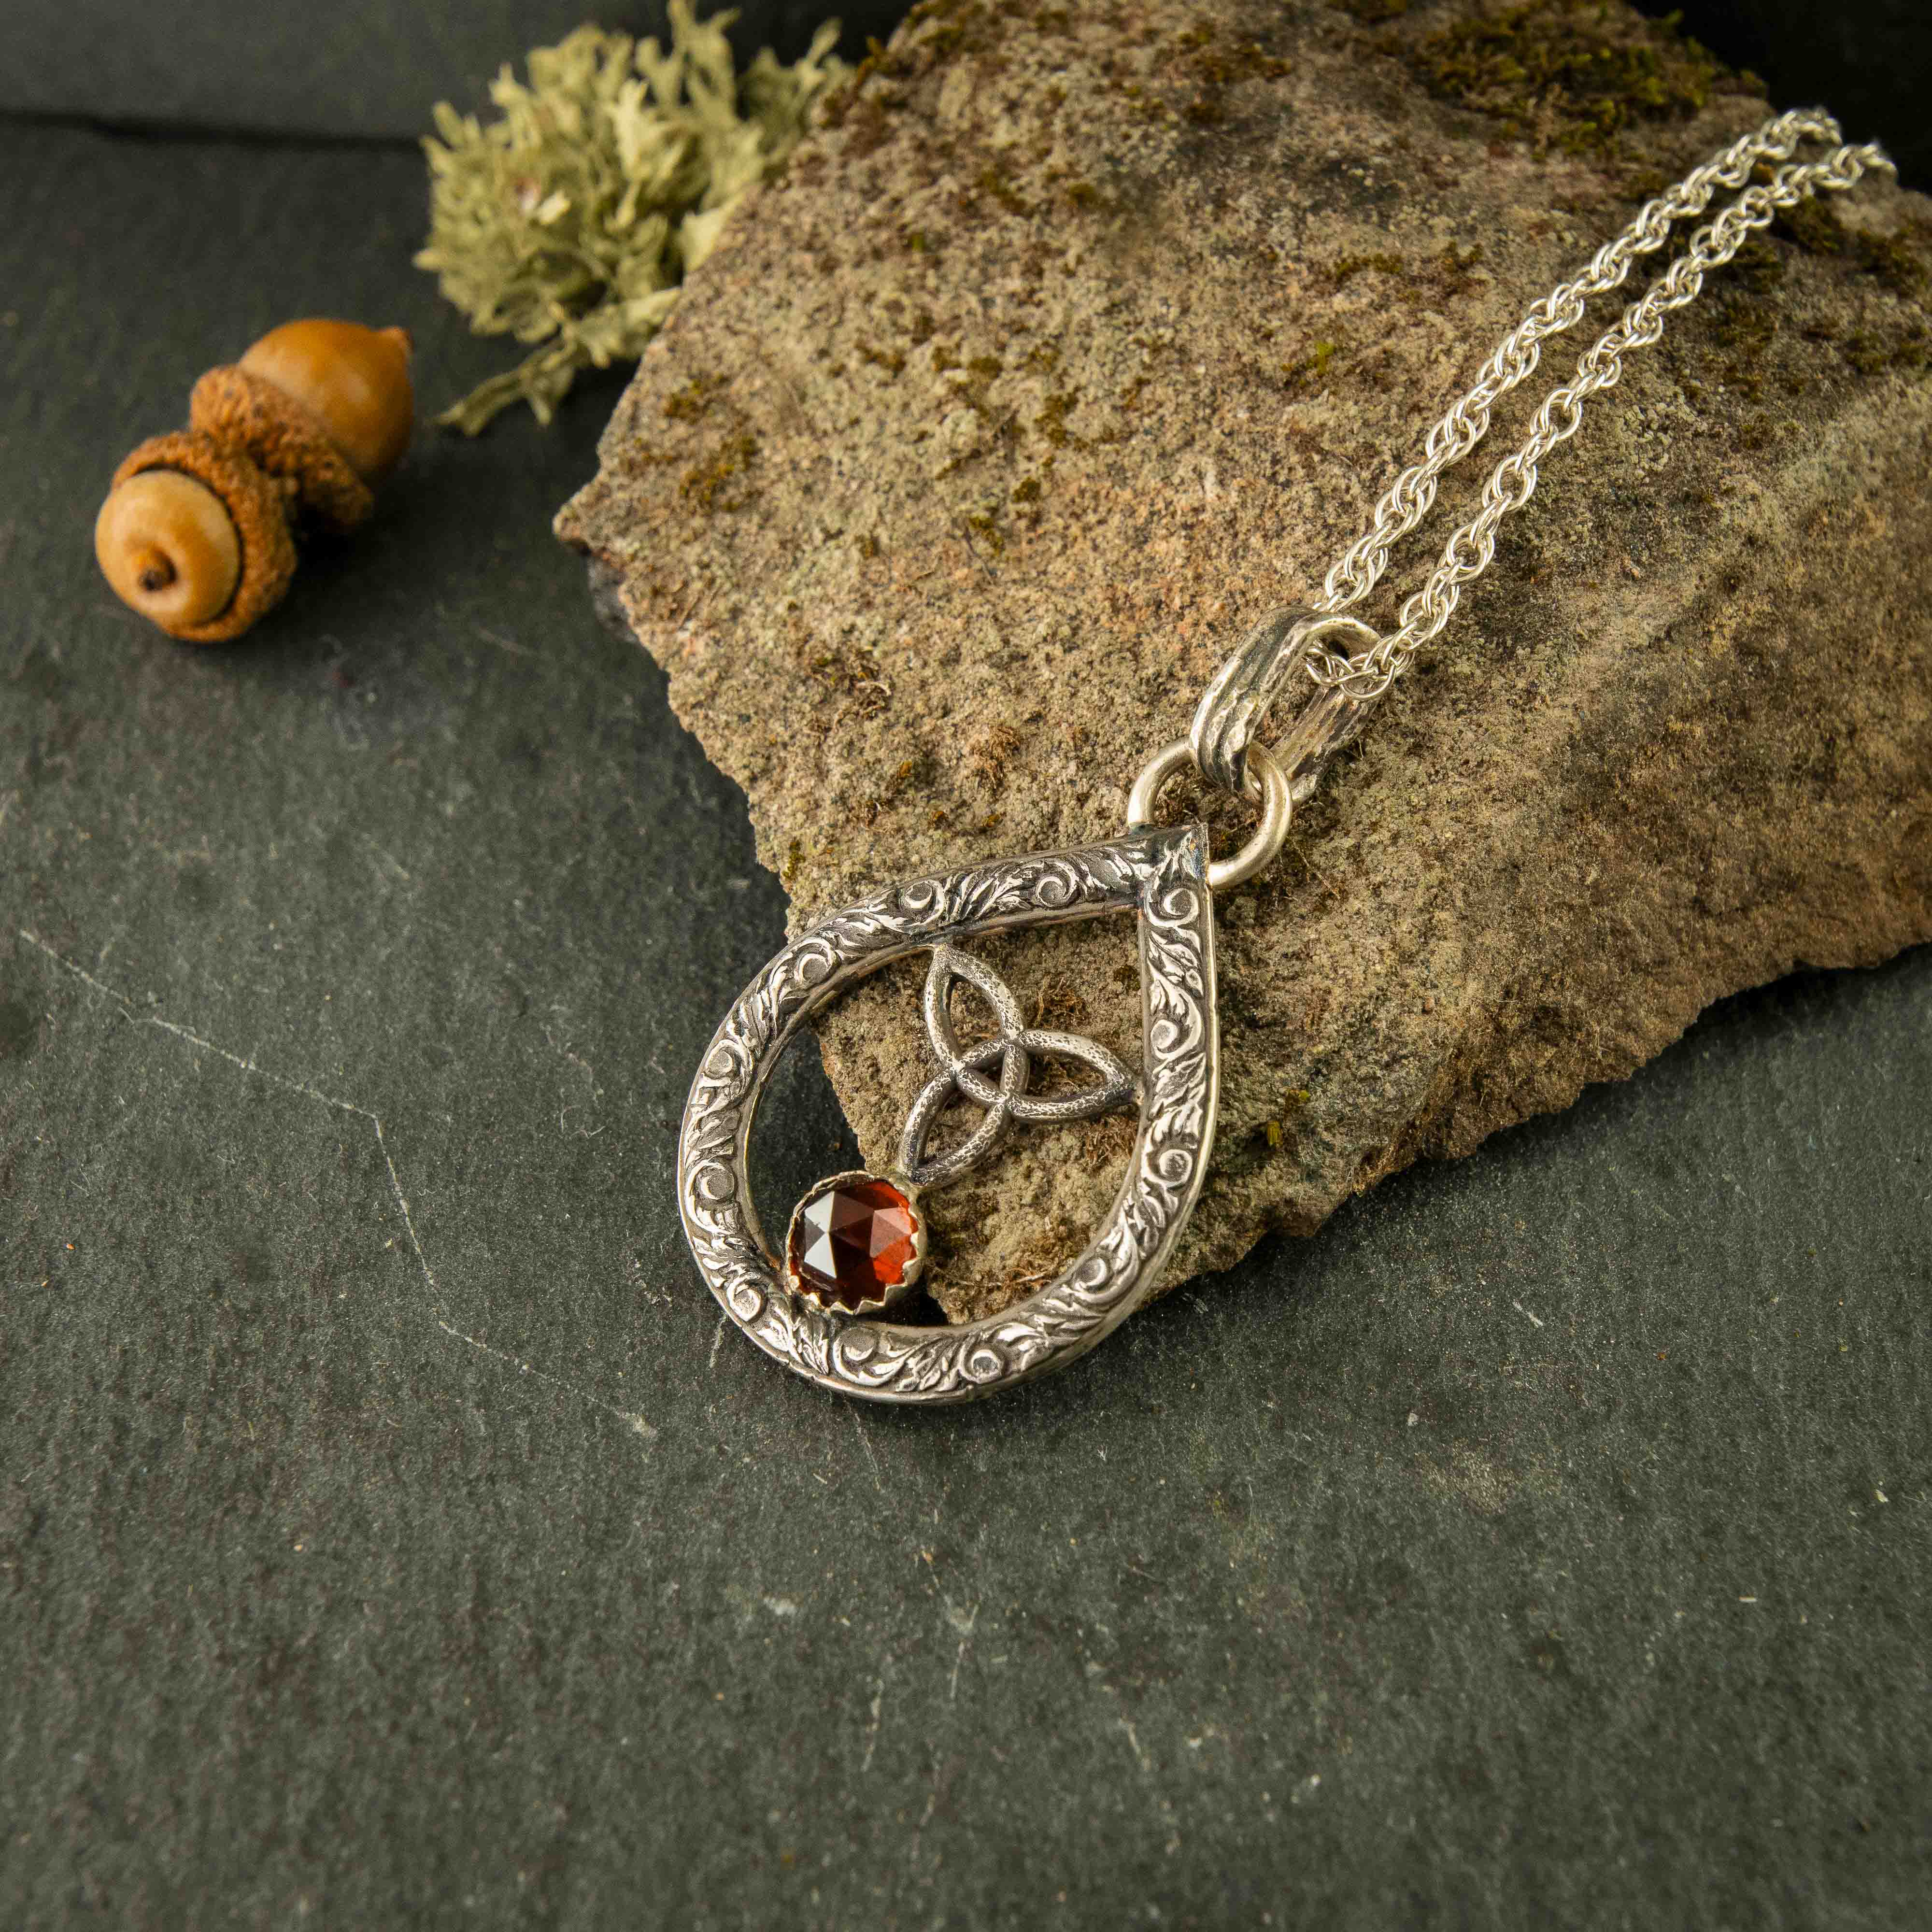 The maiden necklace, a tear dropped shaped sterling silver pendant that freatures a trinity knot, rosecut garnet and filigree styling. Handmade in the USA with ethical craftsmanship